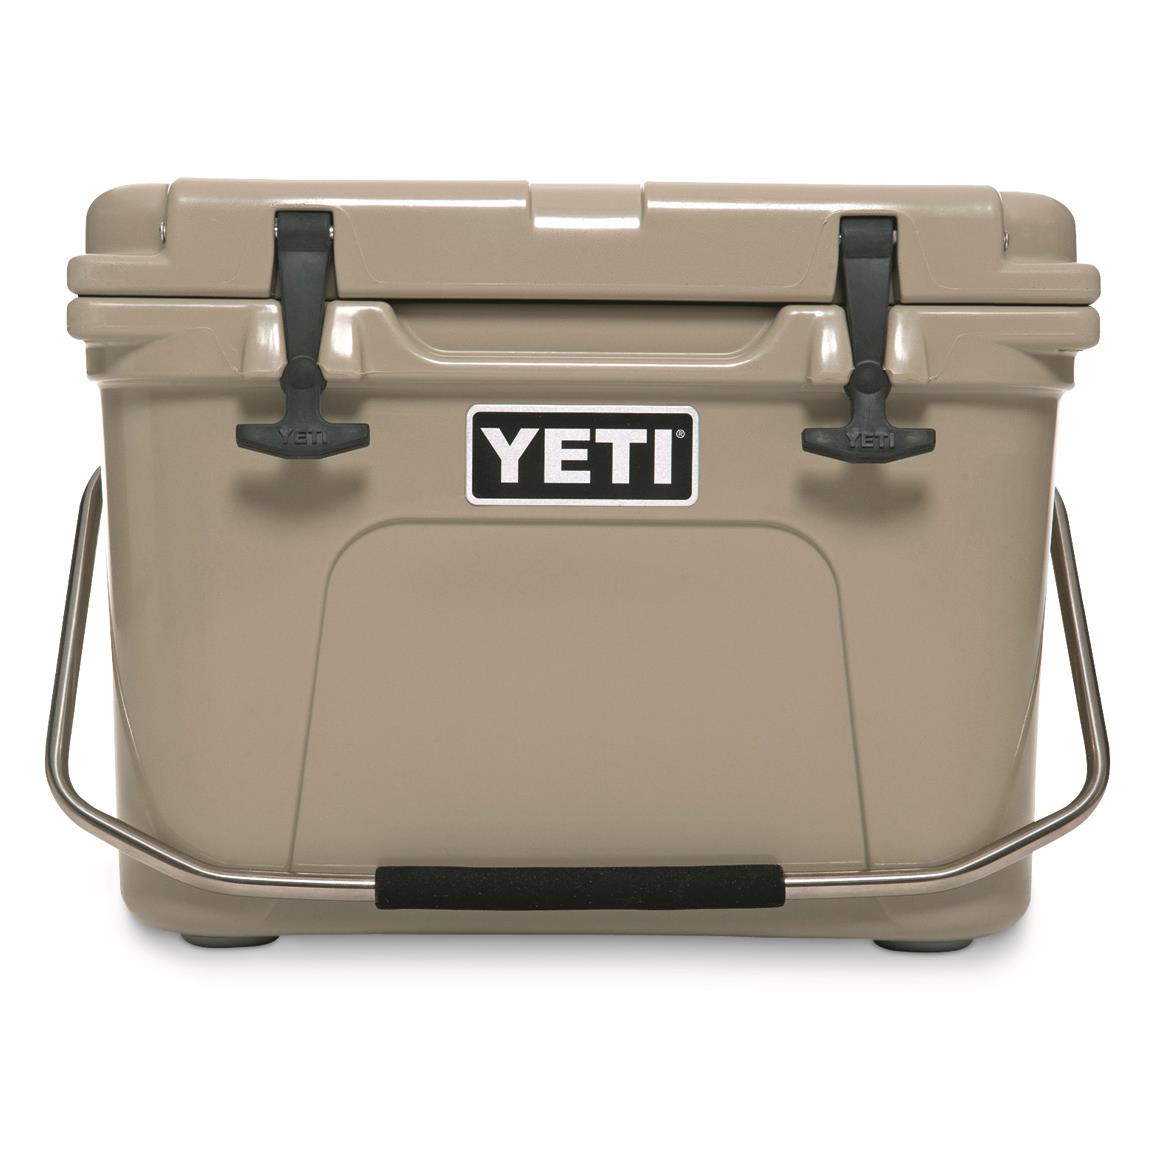 Yeti Roadie 20 Cooler 702715 Camping Coolers At Sportsmans Guide